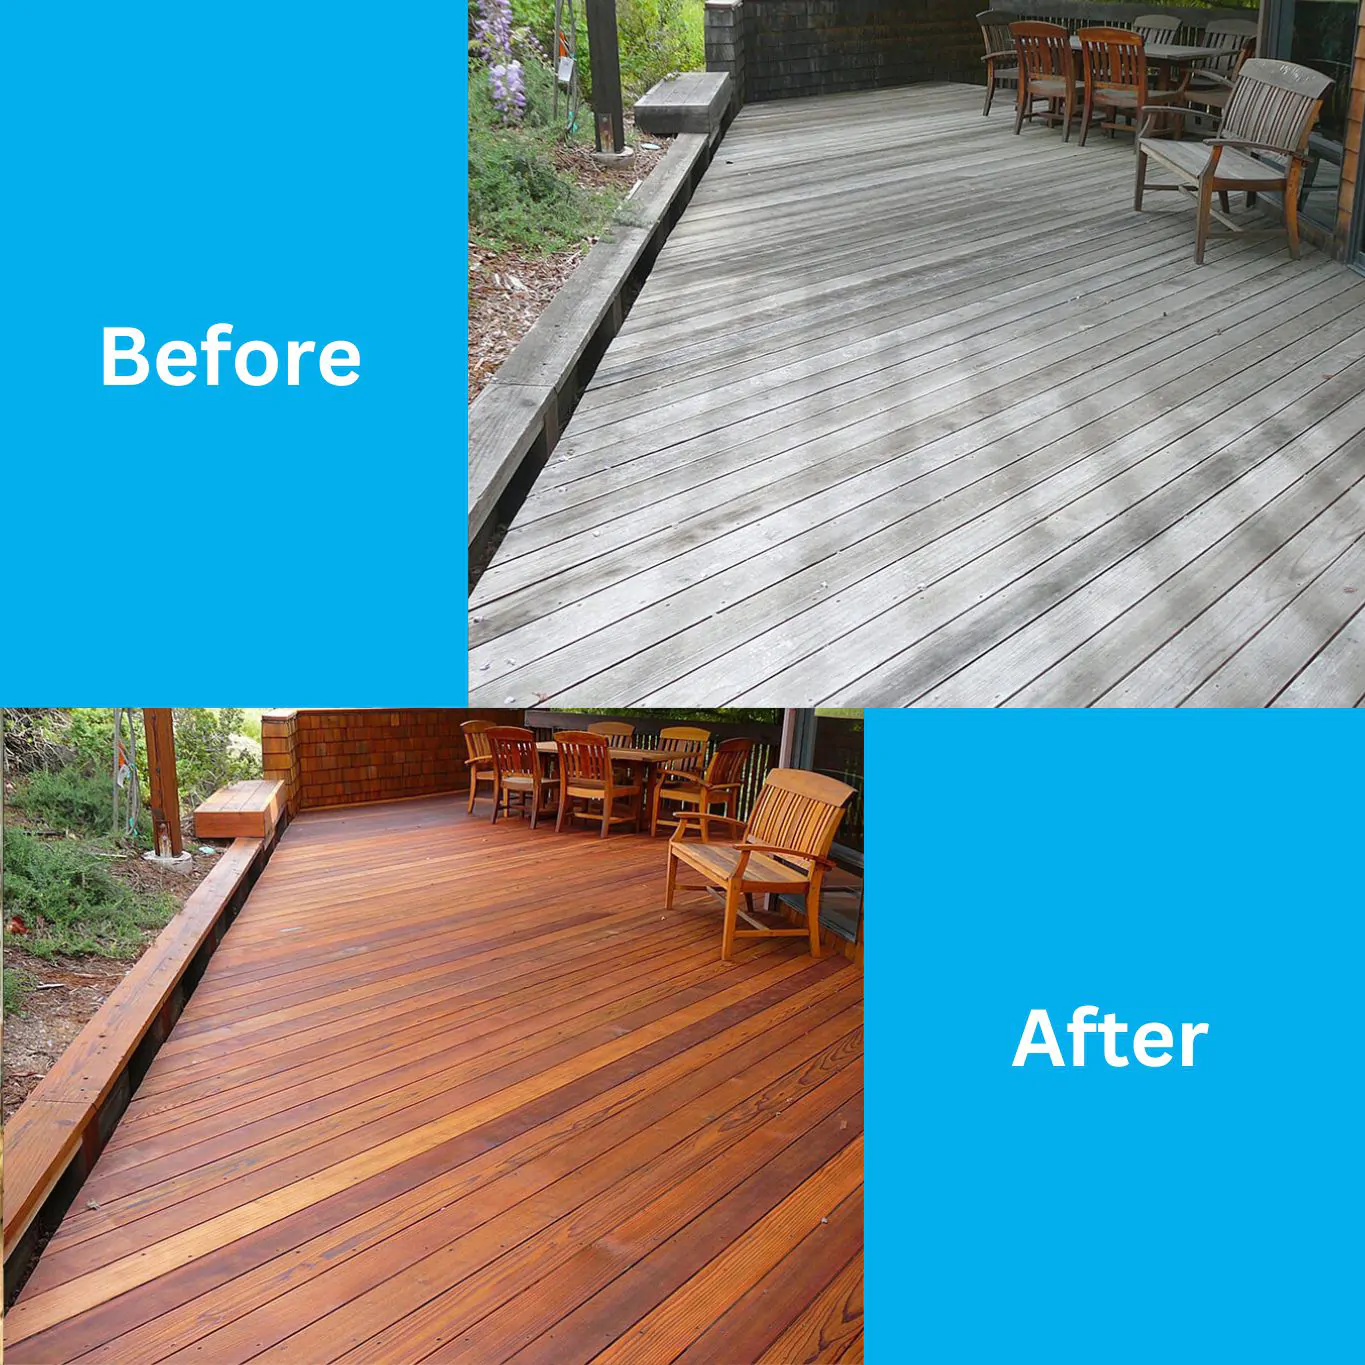 Before and After Professional Deck Restoration Services - All Pro Cape May Deck Builders